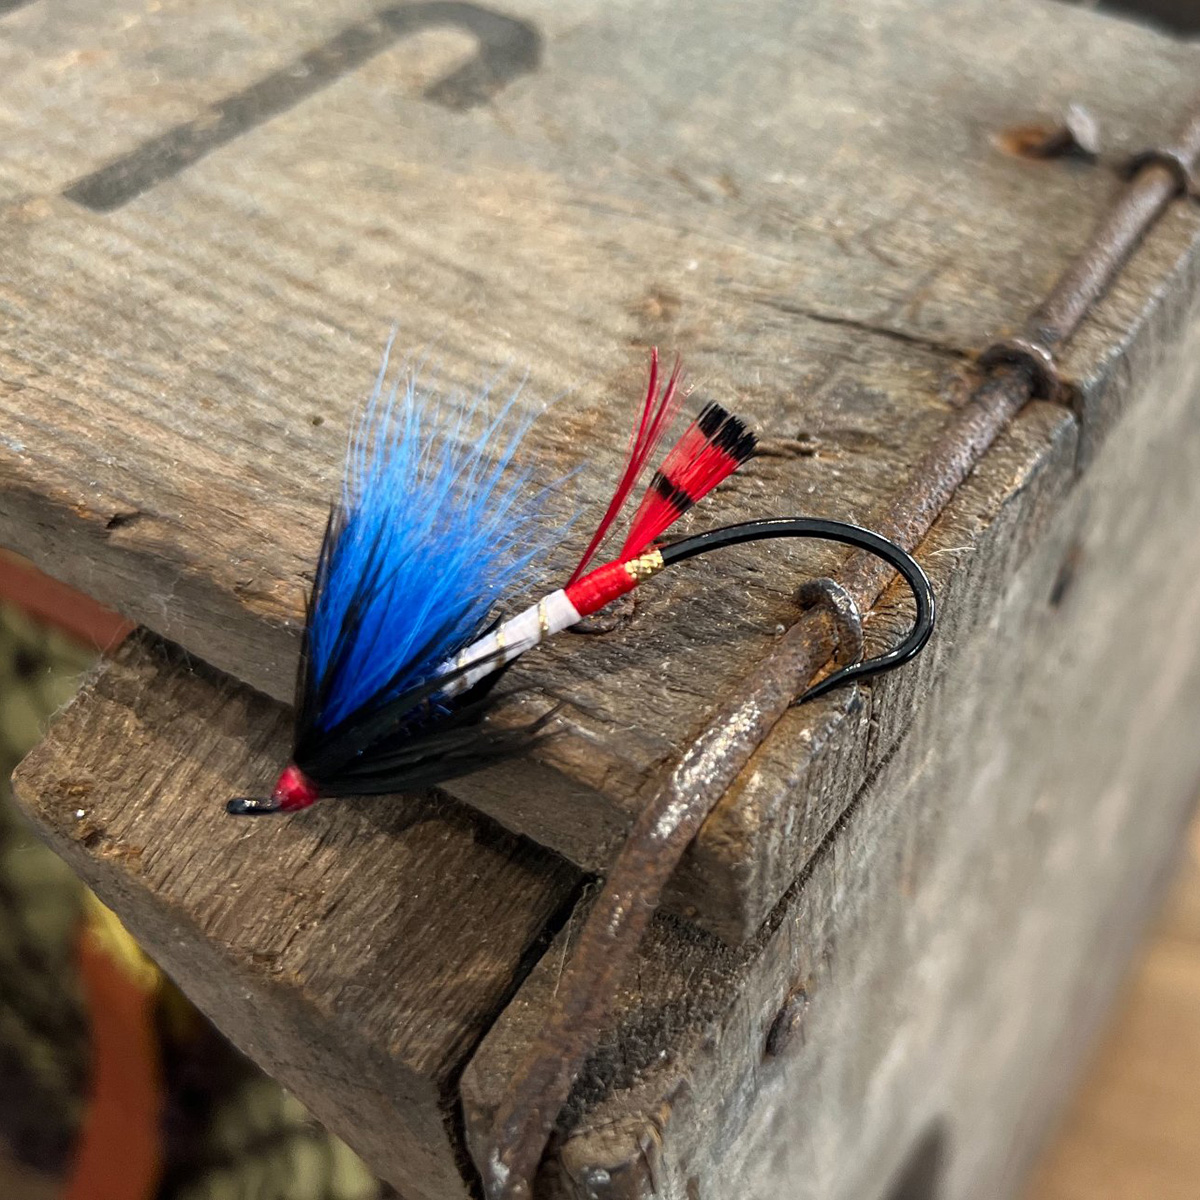 We are very pleased to have donated a further £371.66 to the @AST_Salmon following the sale of our latest batch of HRH salmon flies 👉 farlows.co.uk/farlows-hrh-sa… #farlows #atlanticsalmontrust #atlanticsalmon #salmon #salmonfishing